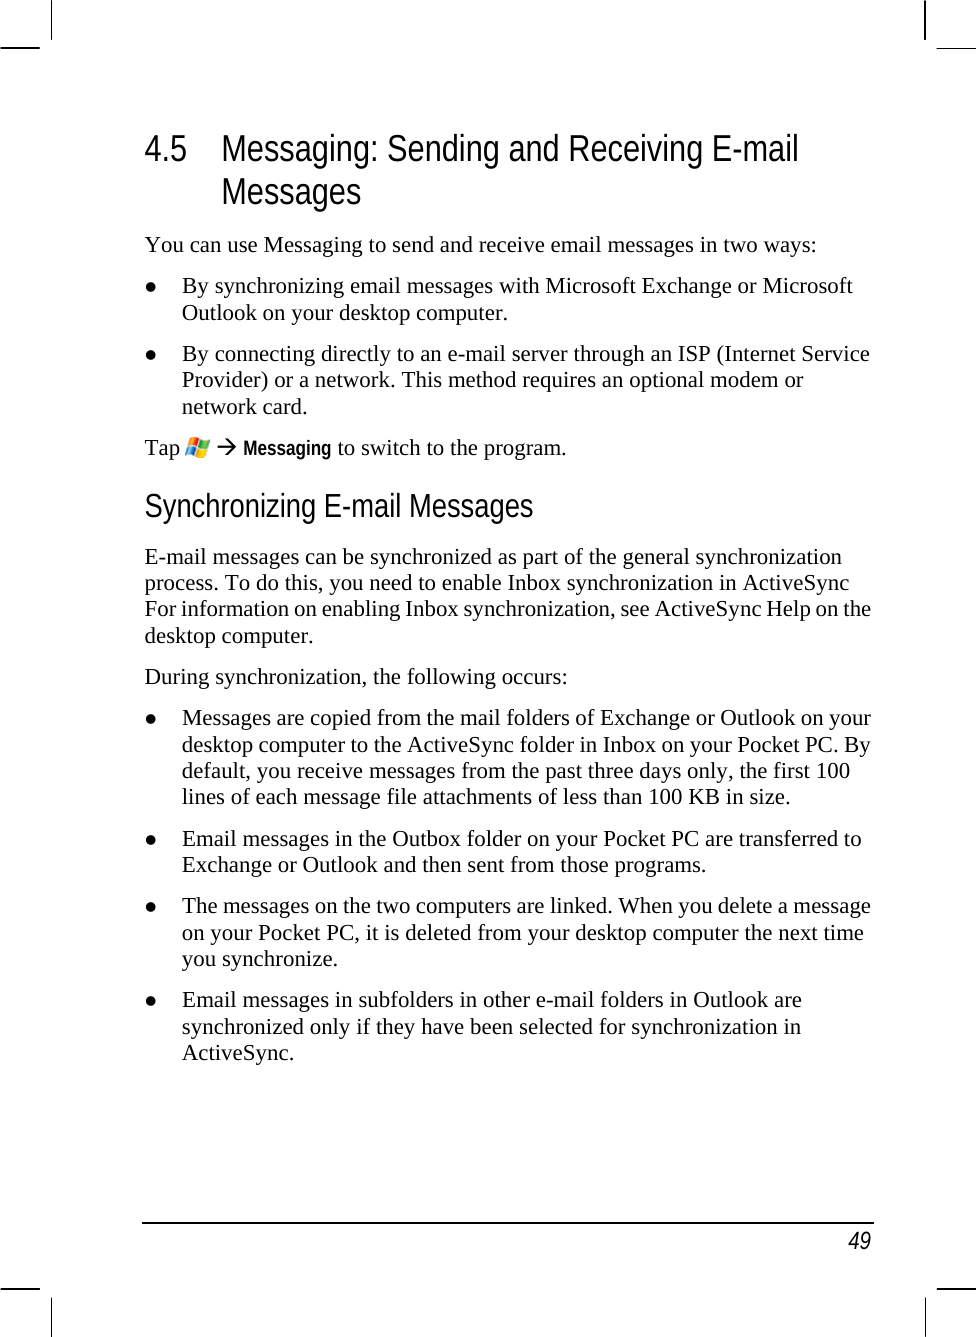   49 4.5 Messaging: Sending and Receiving E-mail Messages You can use Messaging to send and receive email messages in two ways: z By synchronizing email messages with Microsoft Exchange or Microsoft Outlook on your desktop computer. z By connecting directly to an e-mail server through an ISP (Internet Service Provider) or a network. This method requires an optional modem or network card. Tap   Æ Messaging to switch to the program. Synchronizing E-mail Messages E-mail messages can be synchronized as part of the general synchronization process. To do this, you need to enable Inbox synchronization in ActiveSync For information on enabling Inbox synchronization, see ActiveSync Help on the desktop computer.  During synchronization, the following occurs: z Messages are copied from the mail folders of Exchange or Outlook on your desktop computer to the ActiveSync folder in Inbox on your Pocket PC. By default, you receive messages from the past three days only, the first 100 lines of each message file attachments of less than 100 KB in size. z Email messages in the Outbox folder on your Pocket PC are transferred to Exchange or Outlook and then sent from those programs. z The messages on the two computers are linked. When you delete a message on your Pocket PC, it is deleted from your desktop computer the next time you synchronize. z Email messages in subfolders in other e-mail folders in Outlook are synchronized only if they have been selected for synchronization in ActiveSync. 